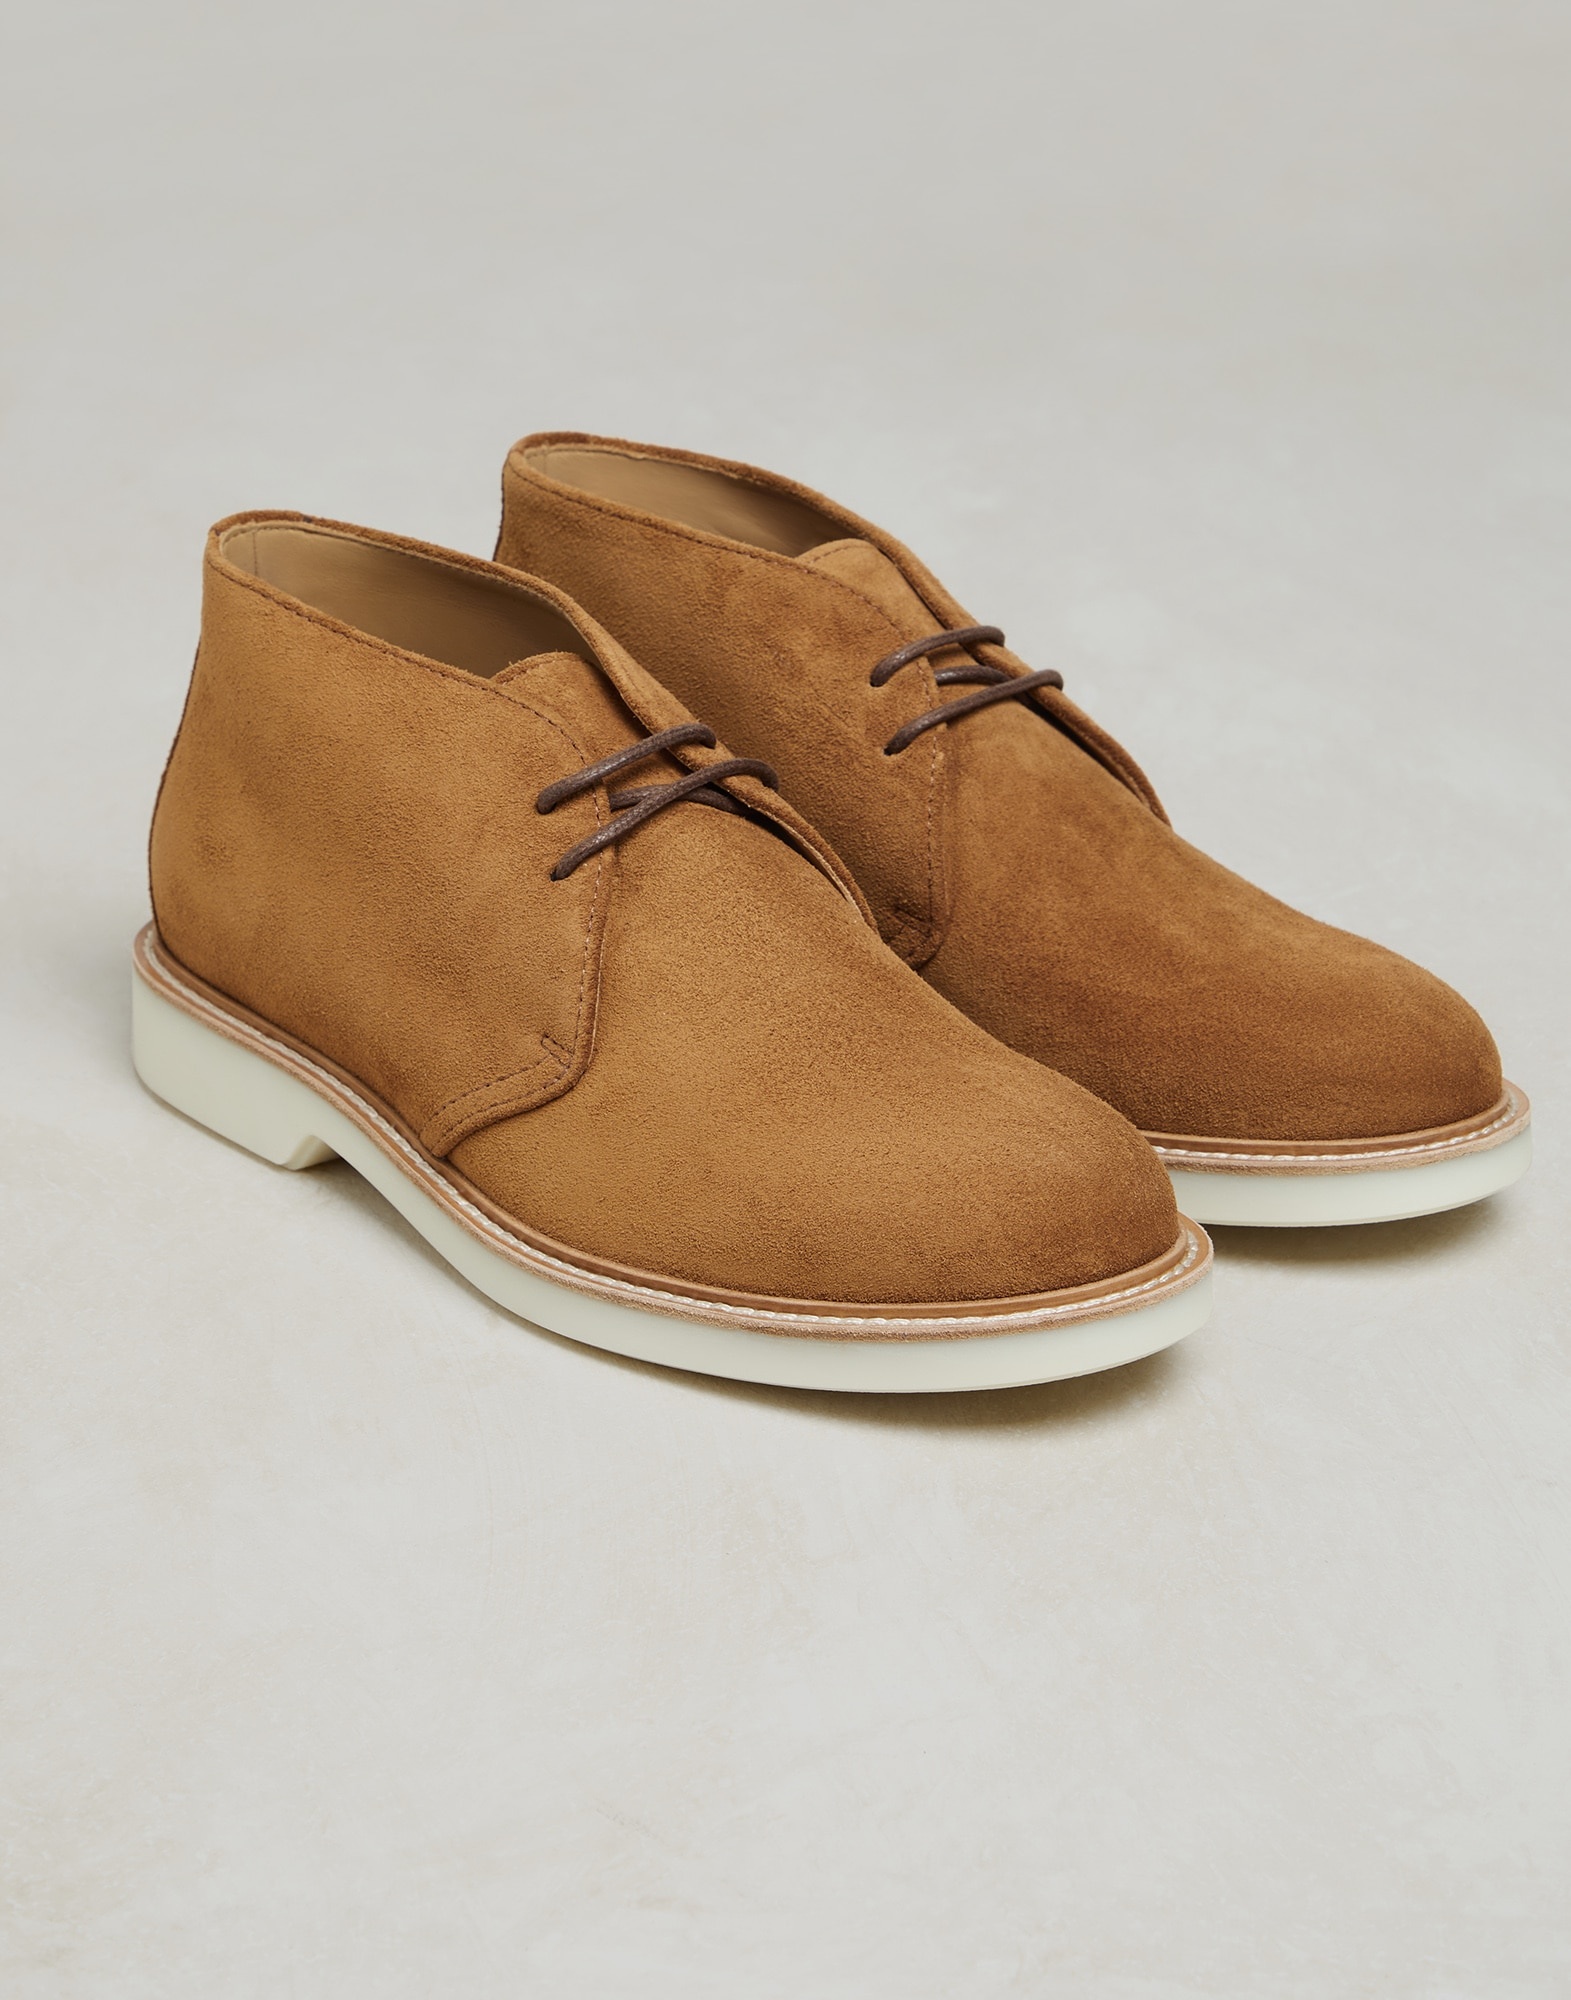 Suede mid boots with white sole - 2